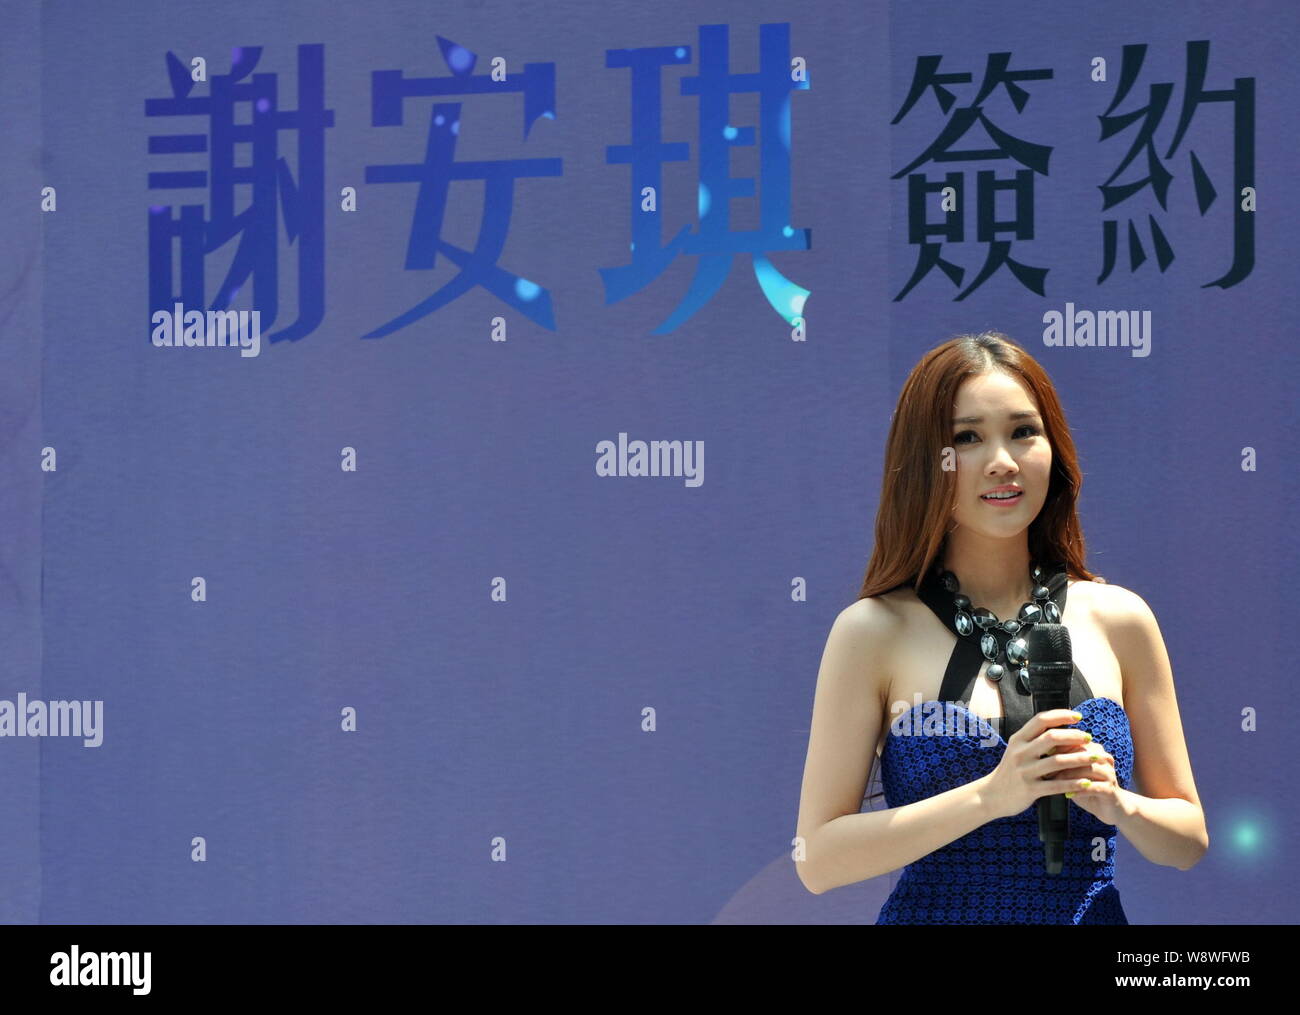 Hong Kong singer and actress Kay Tse poses during a signing press conference for joining Huayi Brothers Media Corporation to develop her career on the Stock Photo